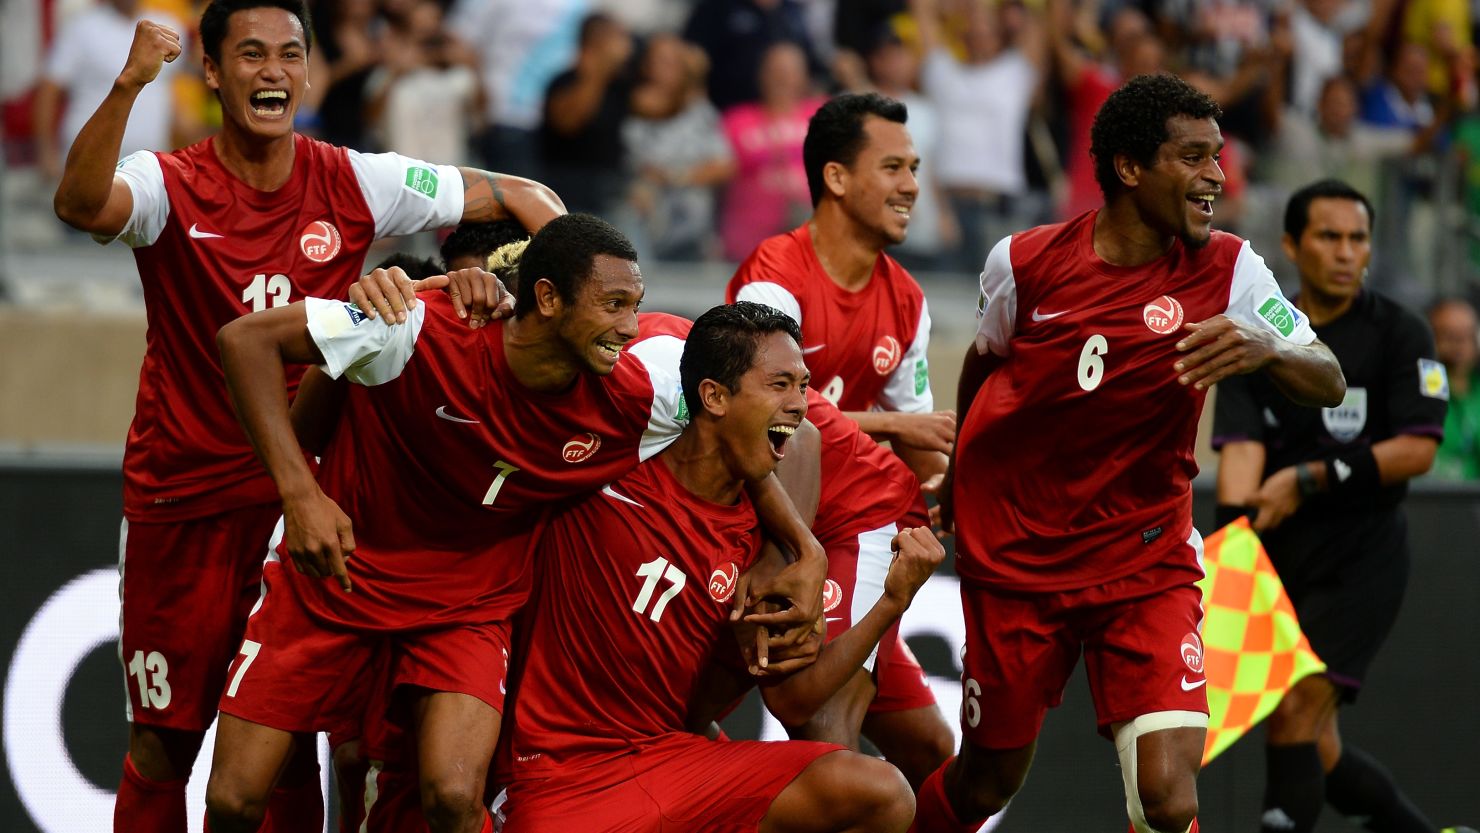 Tahiti's player celebrate Jonathan Tehau's historic goal in their 6-1 defeat to Nigeria in the Confederations Cup.